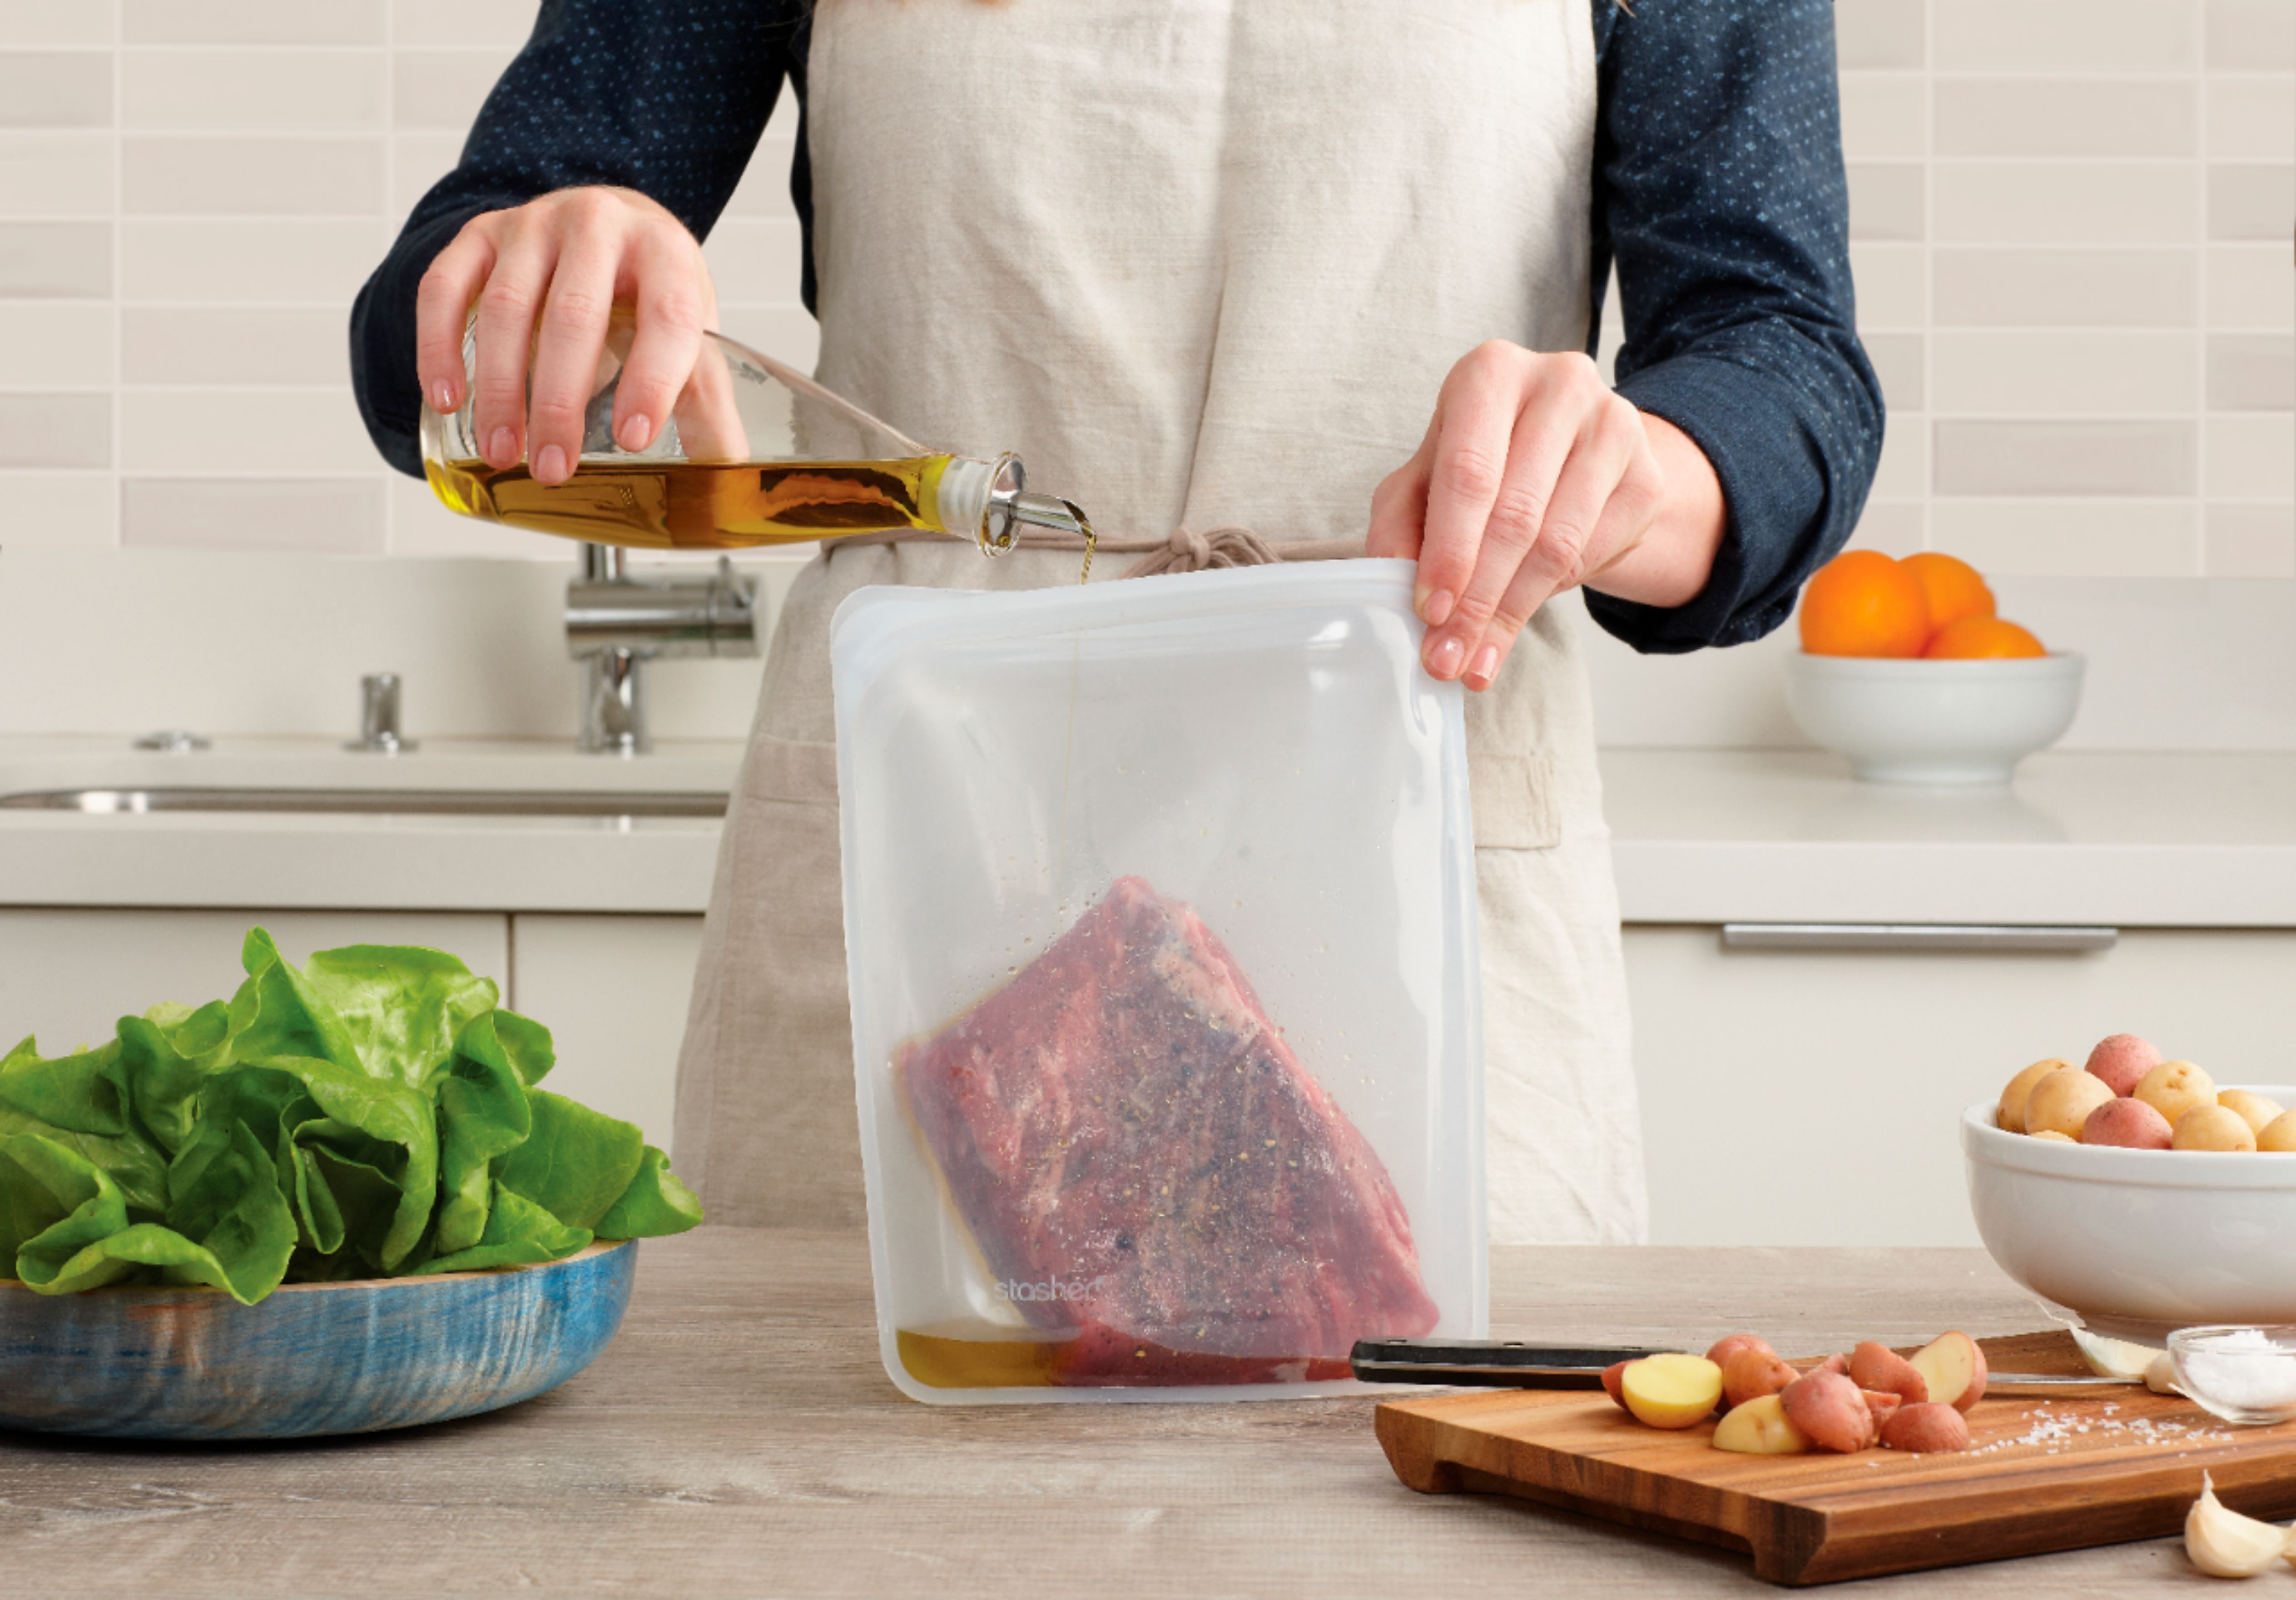 Thoughts on the new Anova Reusable Silicone Bag? : r/sousvide